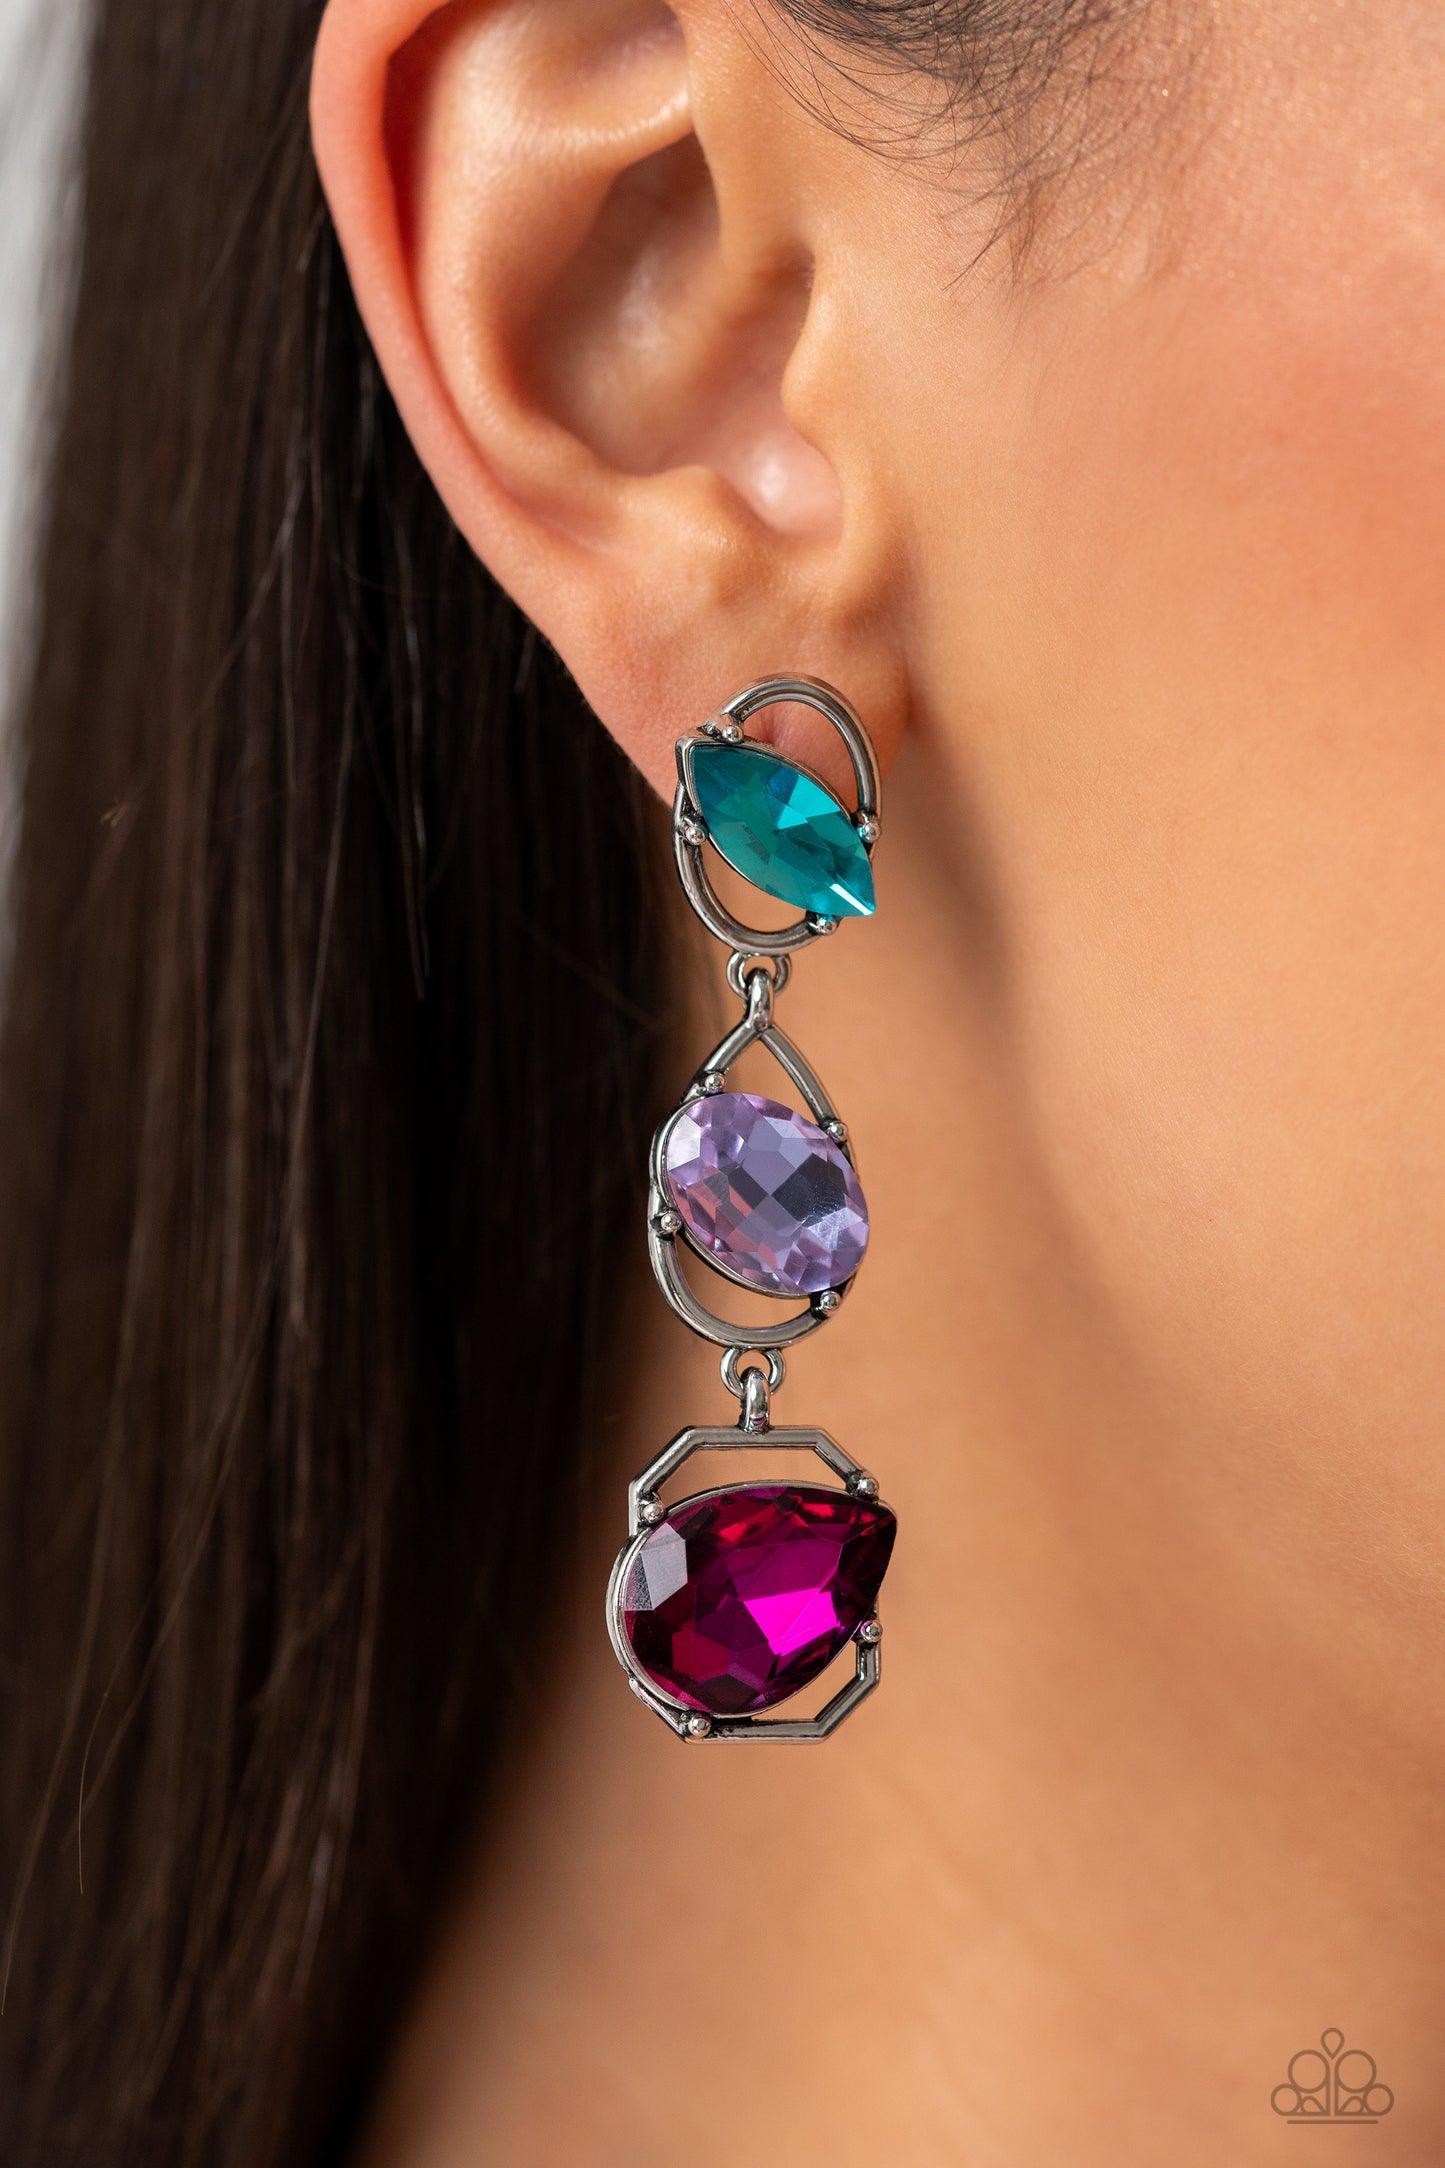 Paparazzi Accessories - Dimensional Dance - Multi Earrings linking together to create a geometric lure, a sleek silver oval, teardrop, and emerald-cut frame cascade down the ear. Slanted sideways in pronged settings across each frame, a fuchsia teardrop, purple oval-cut, and aquamarine marquise-cut gem create a gorgeous pop of color against the thin edgy frames. Earring attaches to a standard post fitting.  Sold as one pair of post earrings.